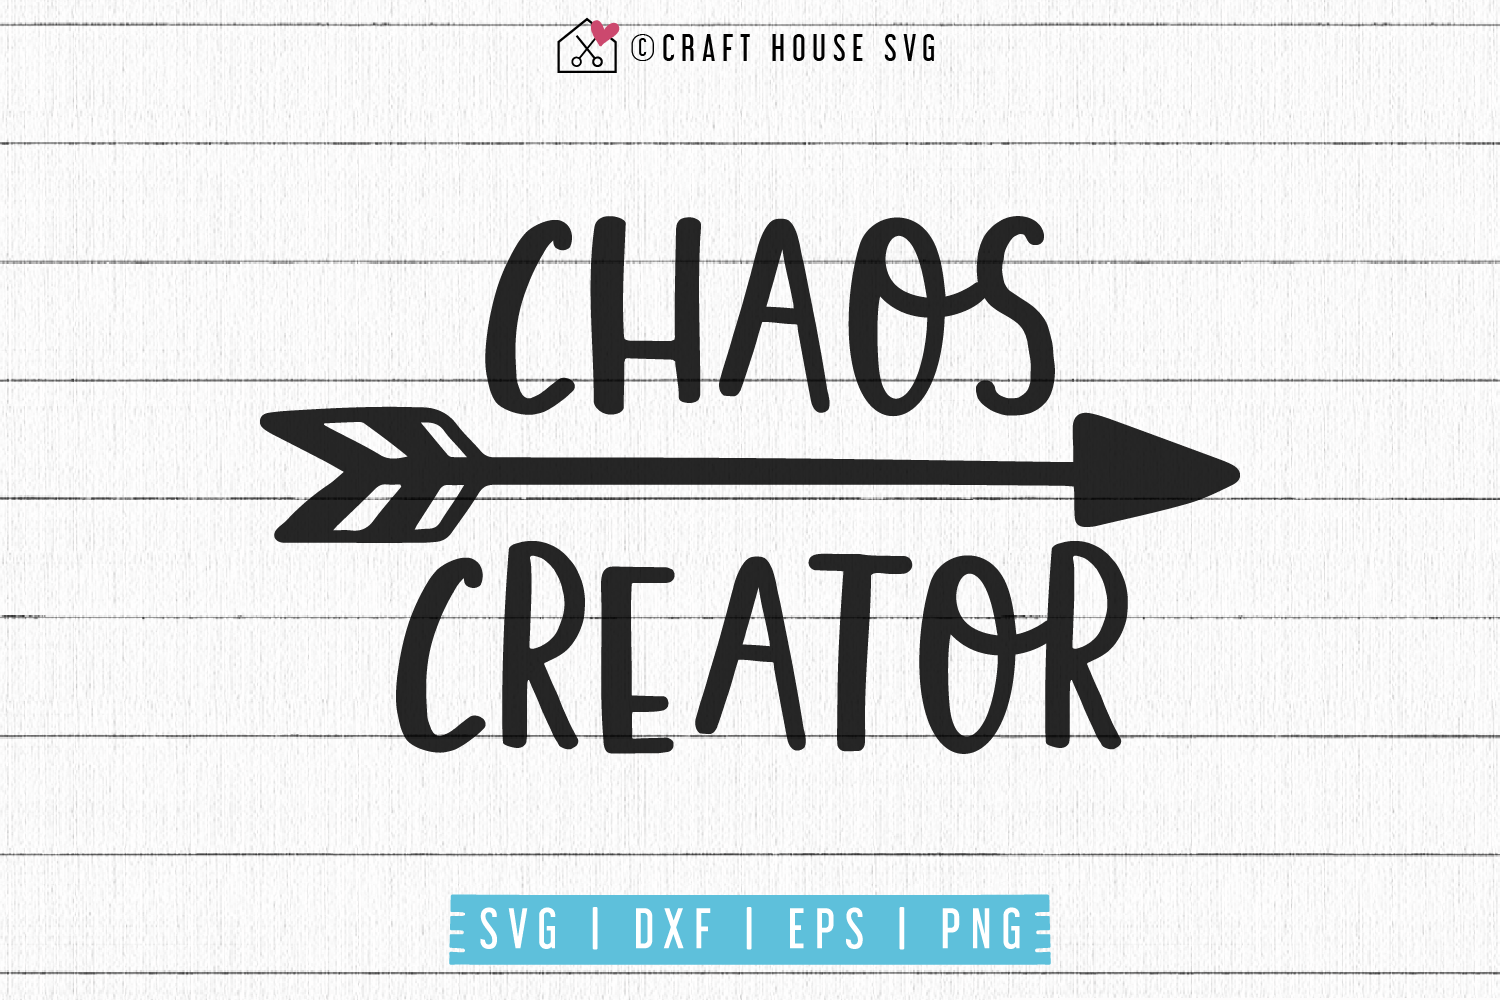 Chaos creator SVG | M53F Craft House SVG - SVG files for Cricut and Silhouette